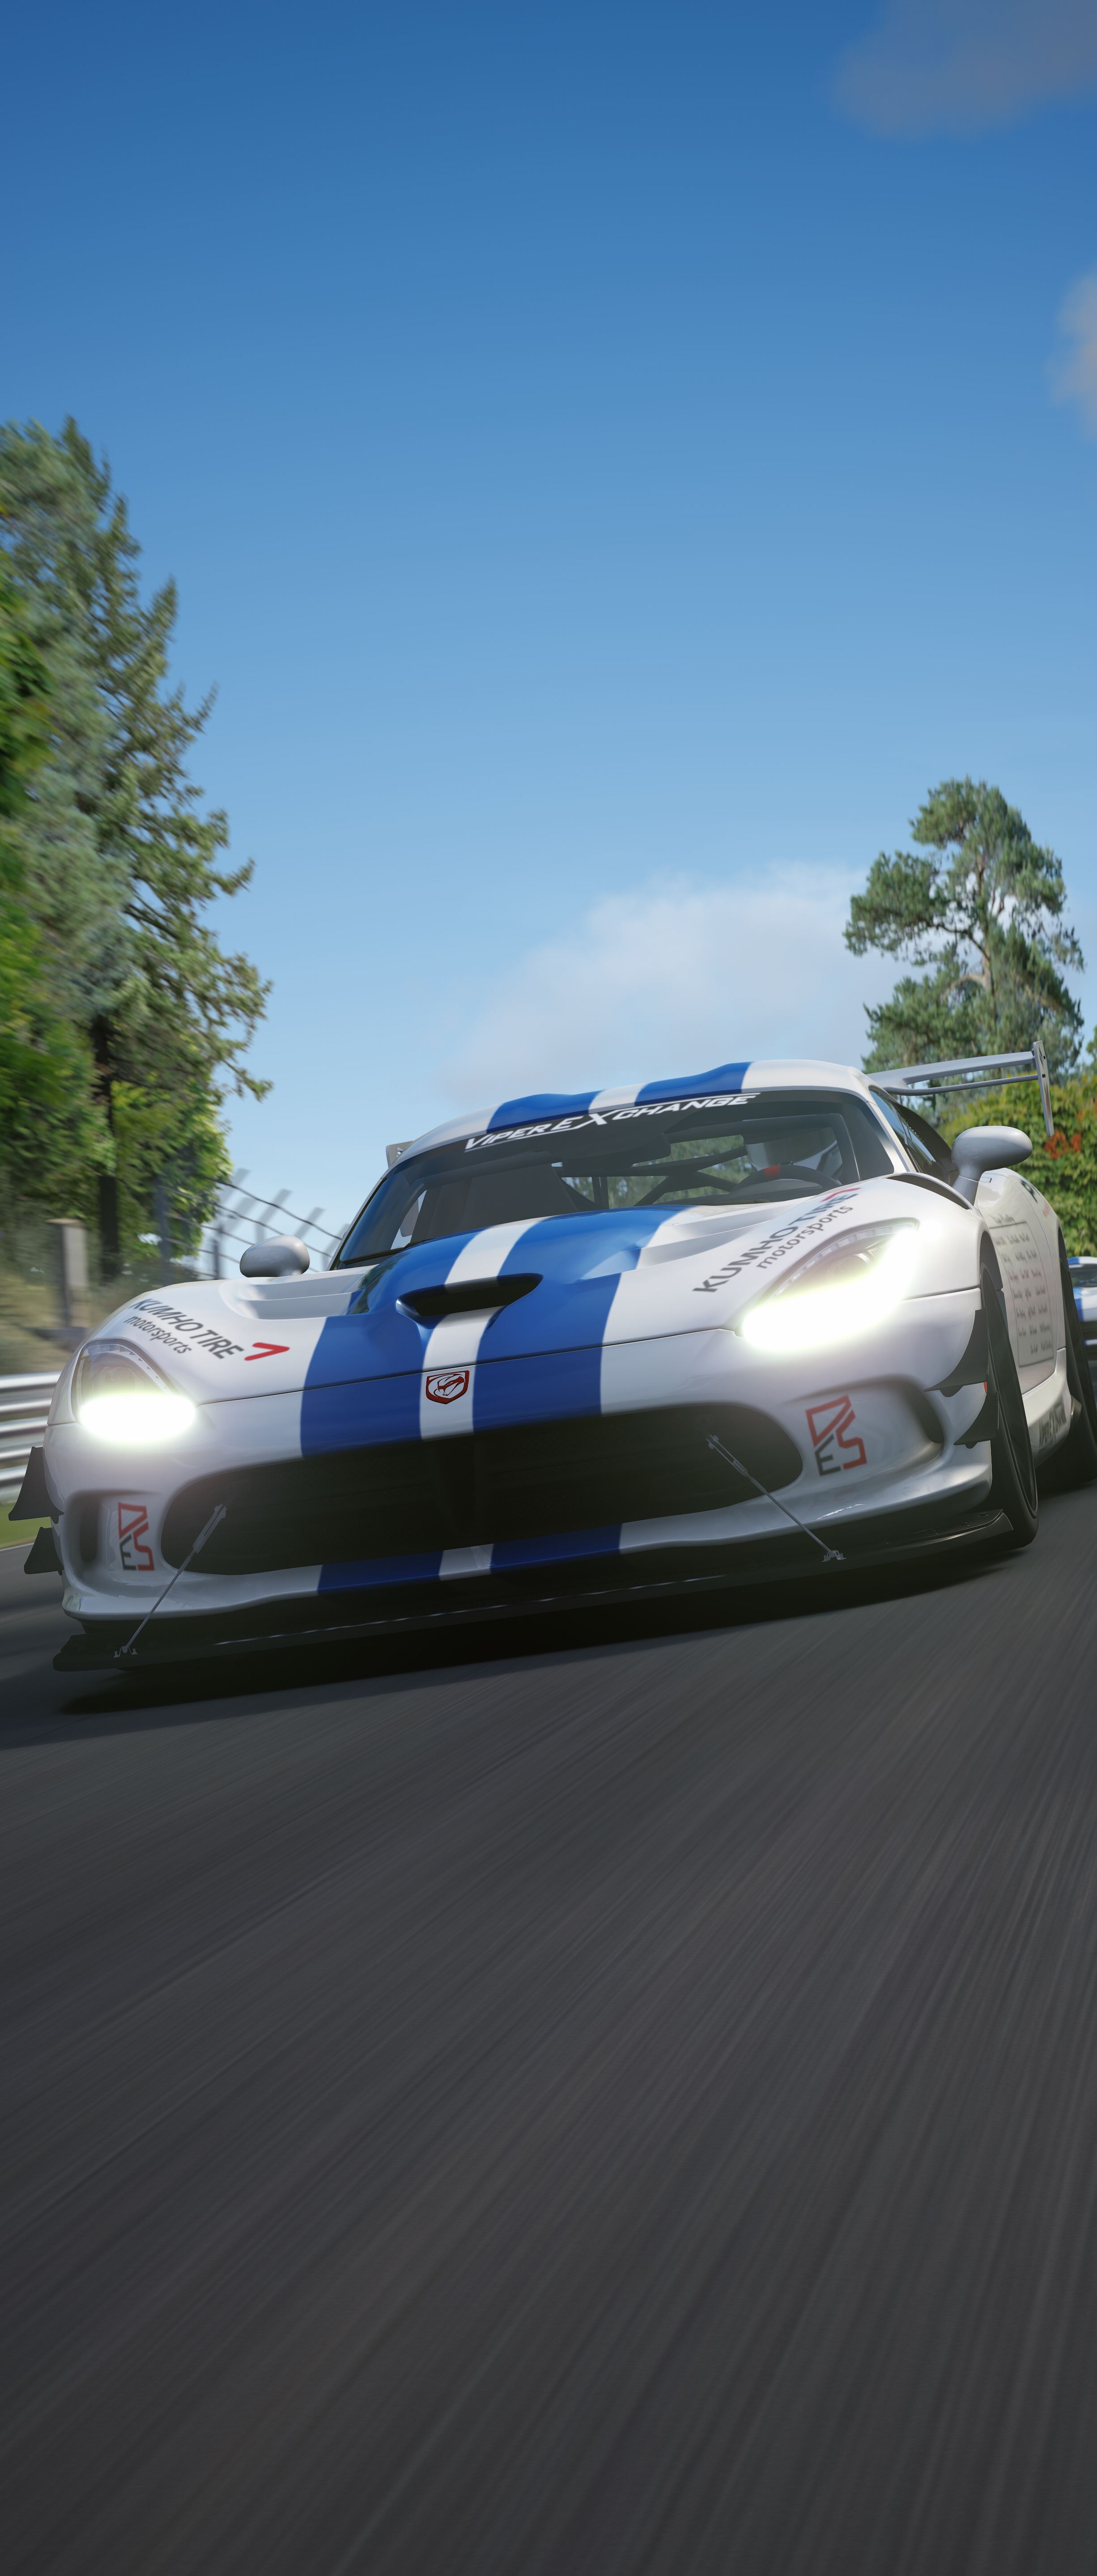 Dodge SRT Viper In Nurburgring Nordschleife Récord Wallpaper by Gt33